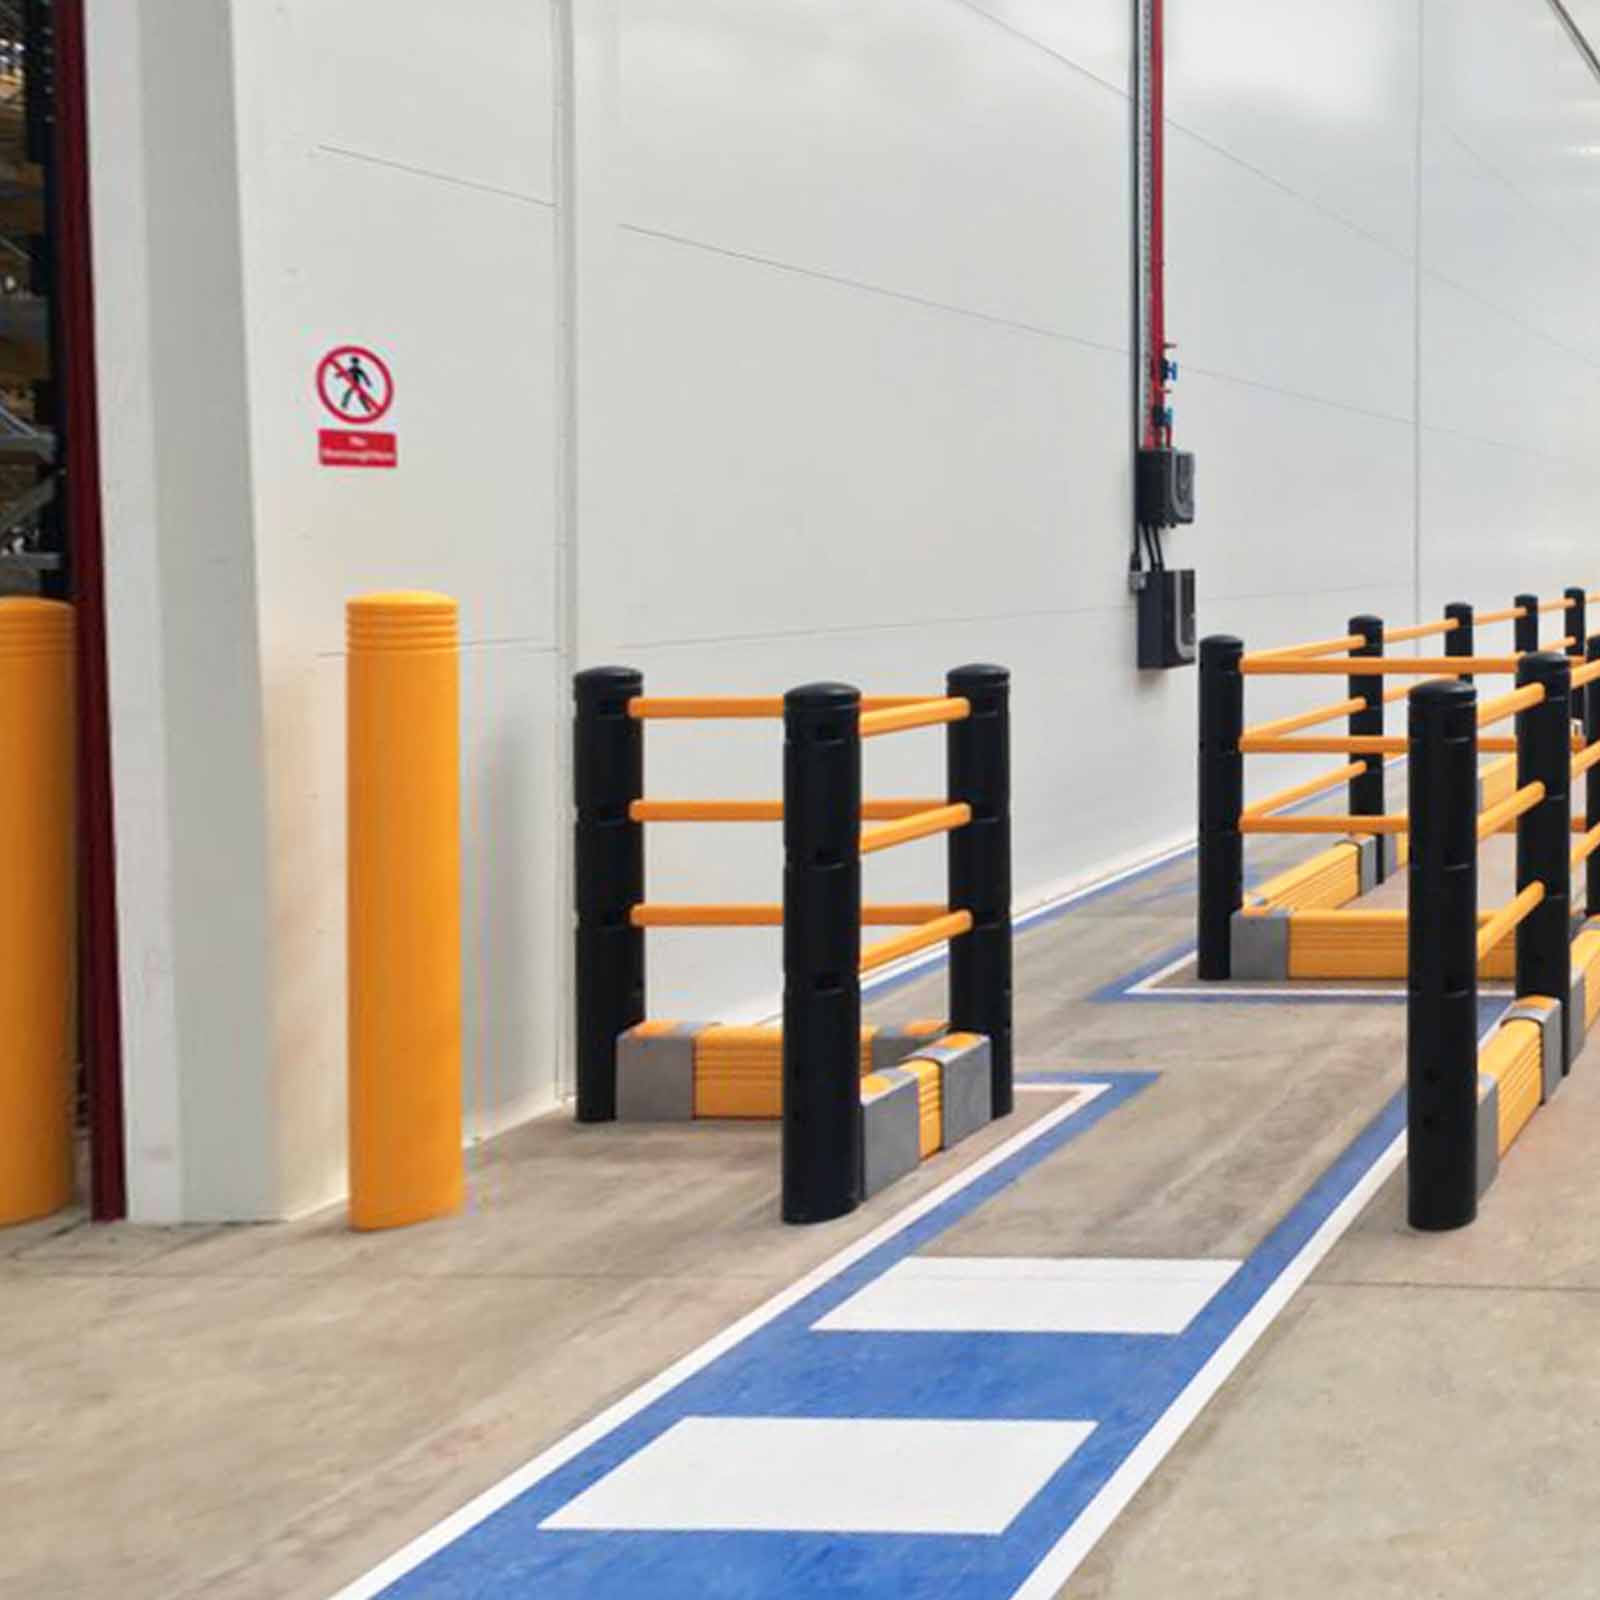 McCue Pedestrian Barrier Safety Protection with Floor Mounted Crash Barrier in Warehouse